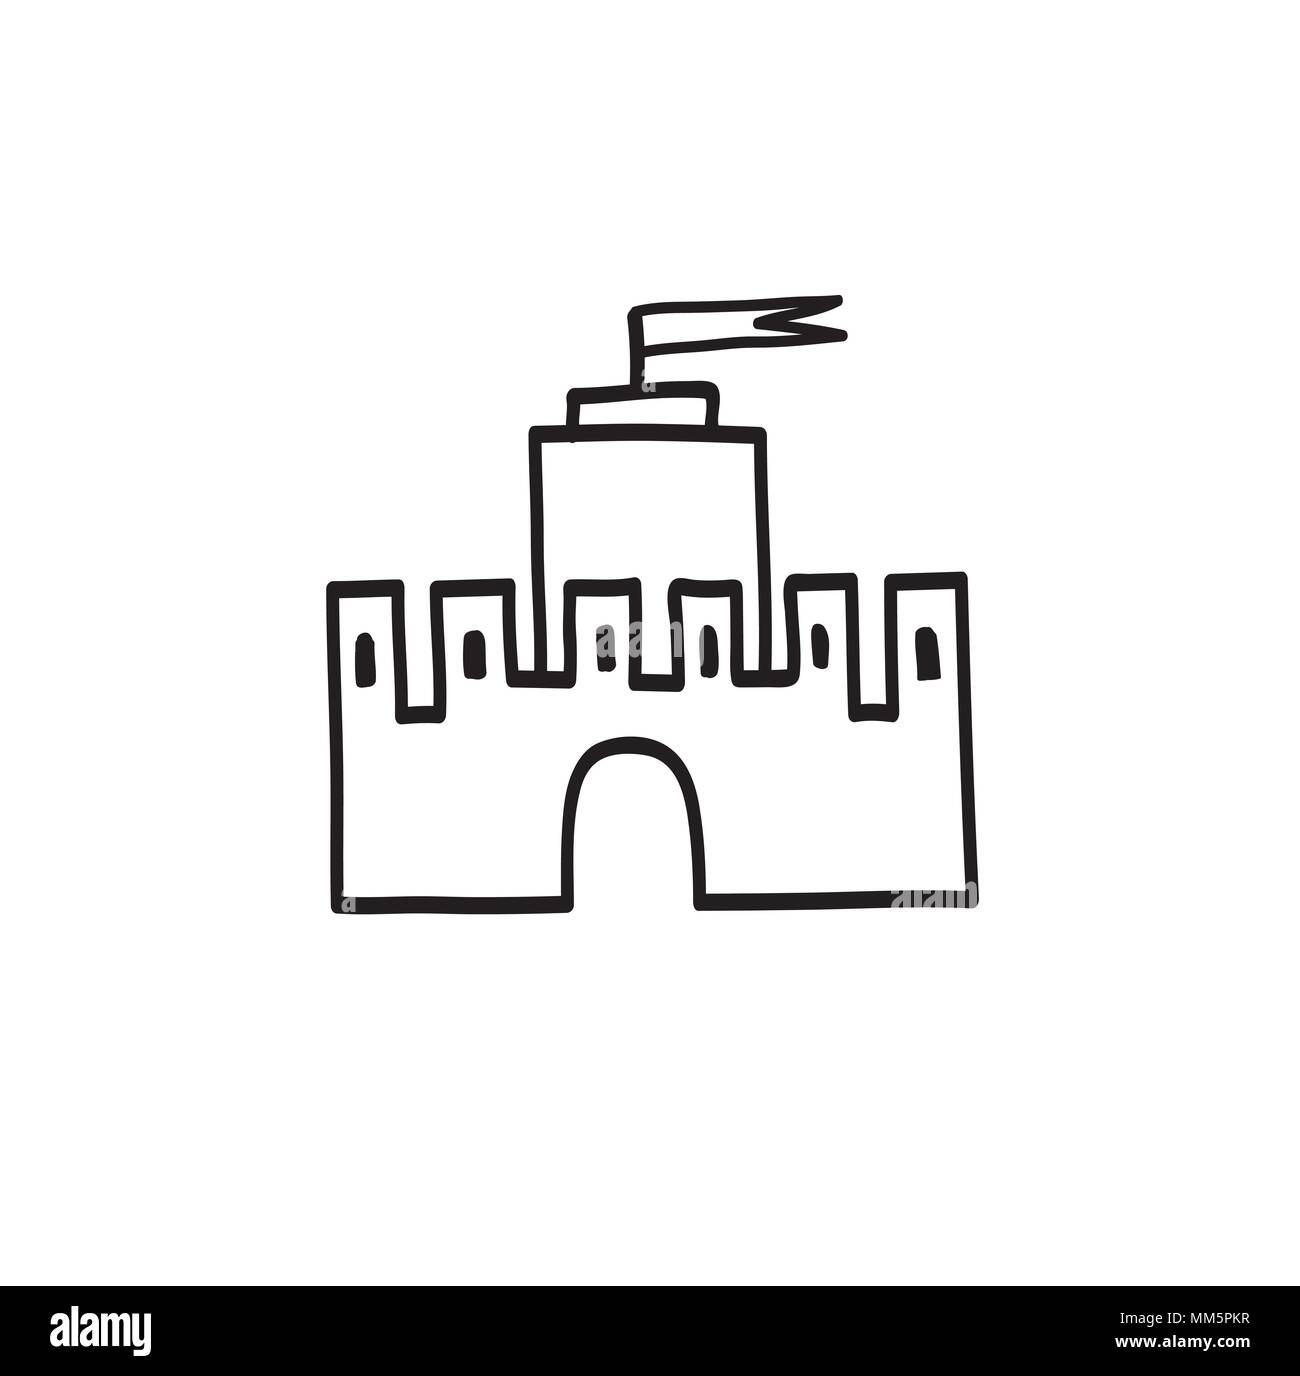 Castle icon. Hand drawn doodle castle building isolated with handwritten lettering CASTLE Stock Vector